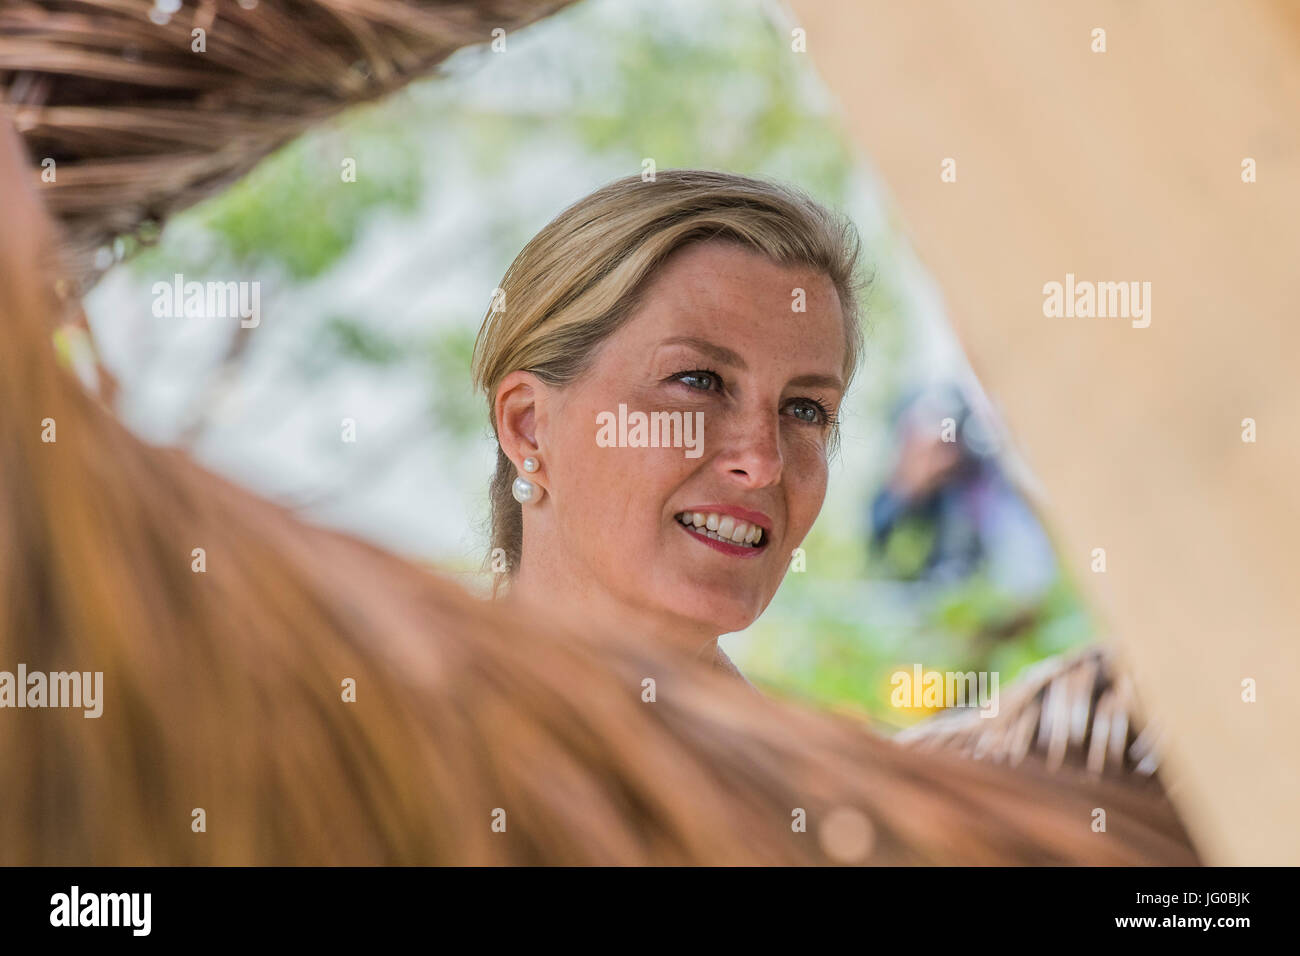 London, UK. 3rd July, 2017. HRH the Countess of Wessex, patron of the charity, on Blind Veterans UK: its all about Community Garden by Andrew Fisher Tomlin and Dan Bowyer - The Hampton Court Flower Show, organised by the Royal Horticultural Society (RHS). In the grounds of the Hampton Court Palace, London. Credit: Guy Bell/Alamy Live News Stock Photo